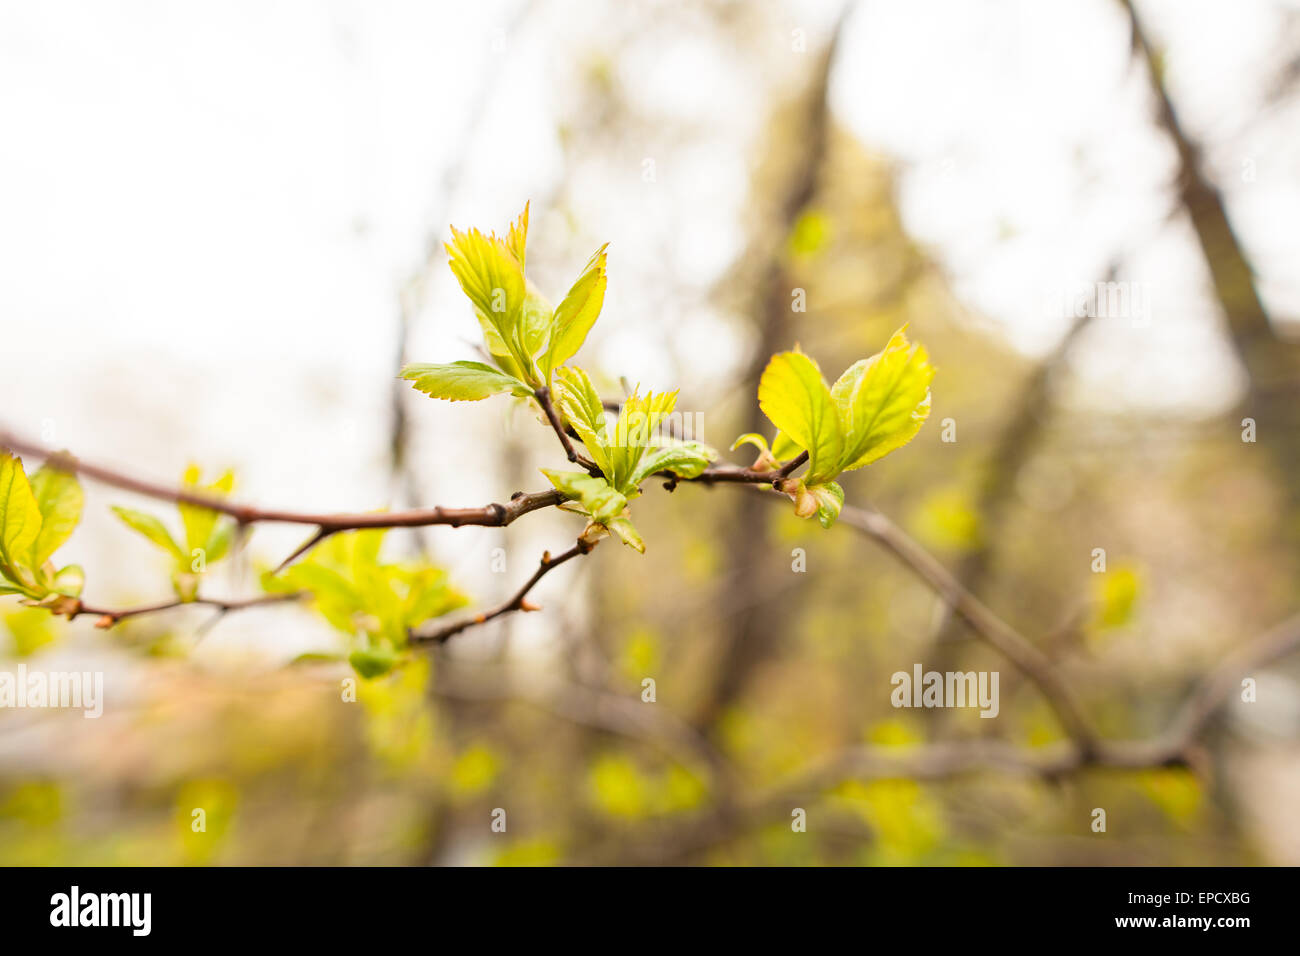 New spring leaves are growing on trees Stock Photo